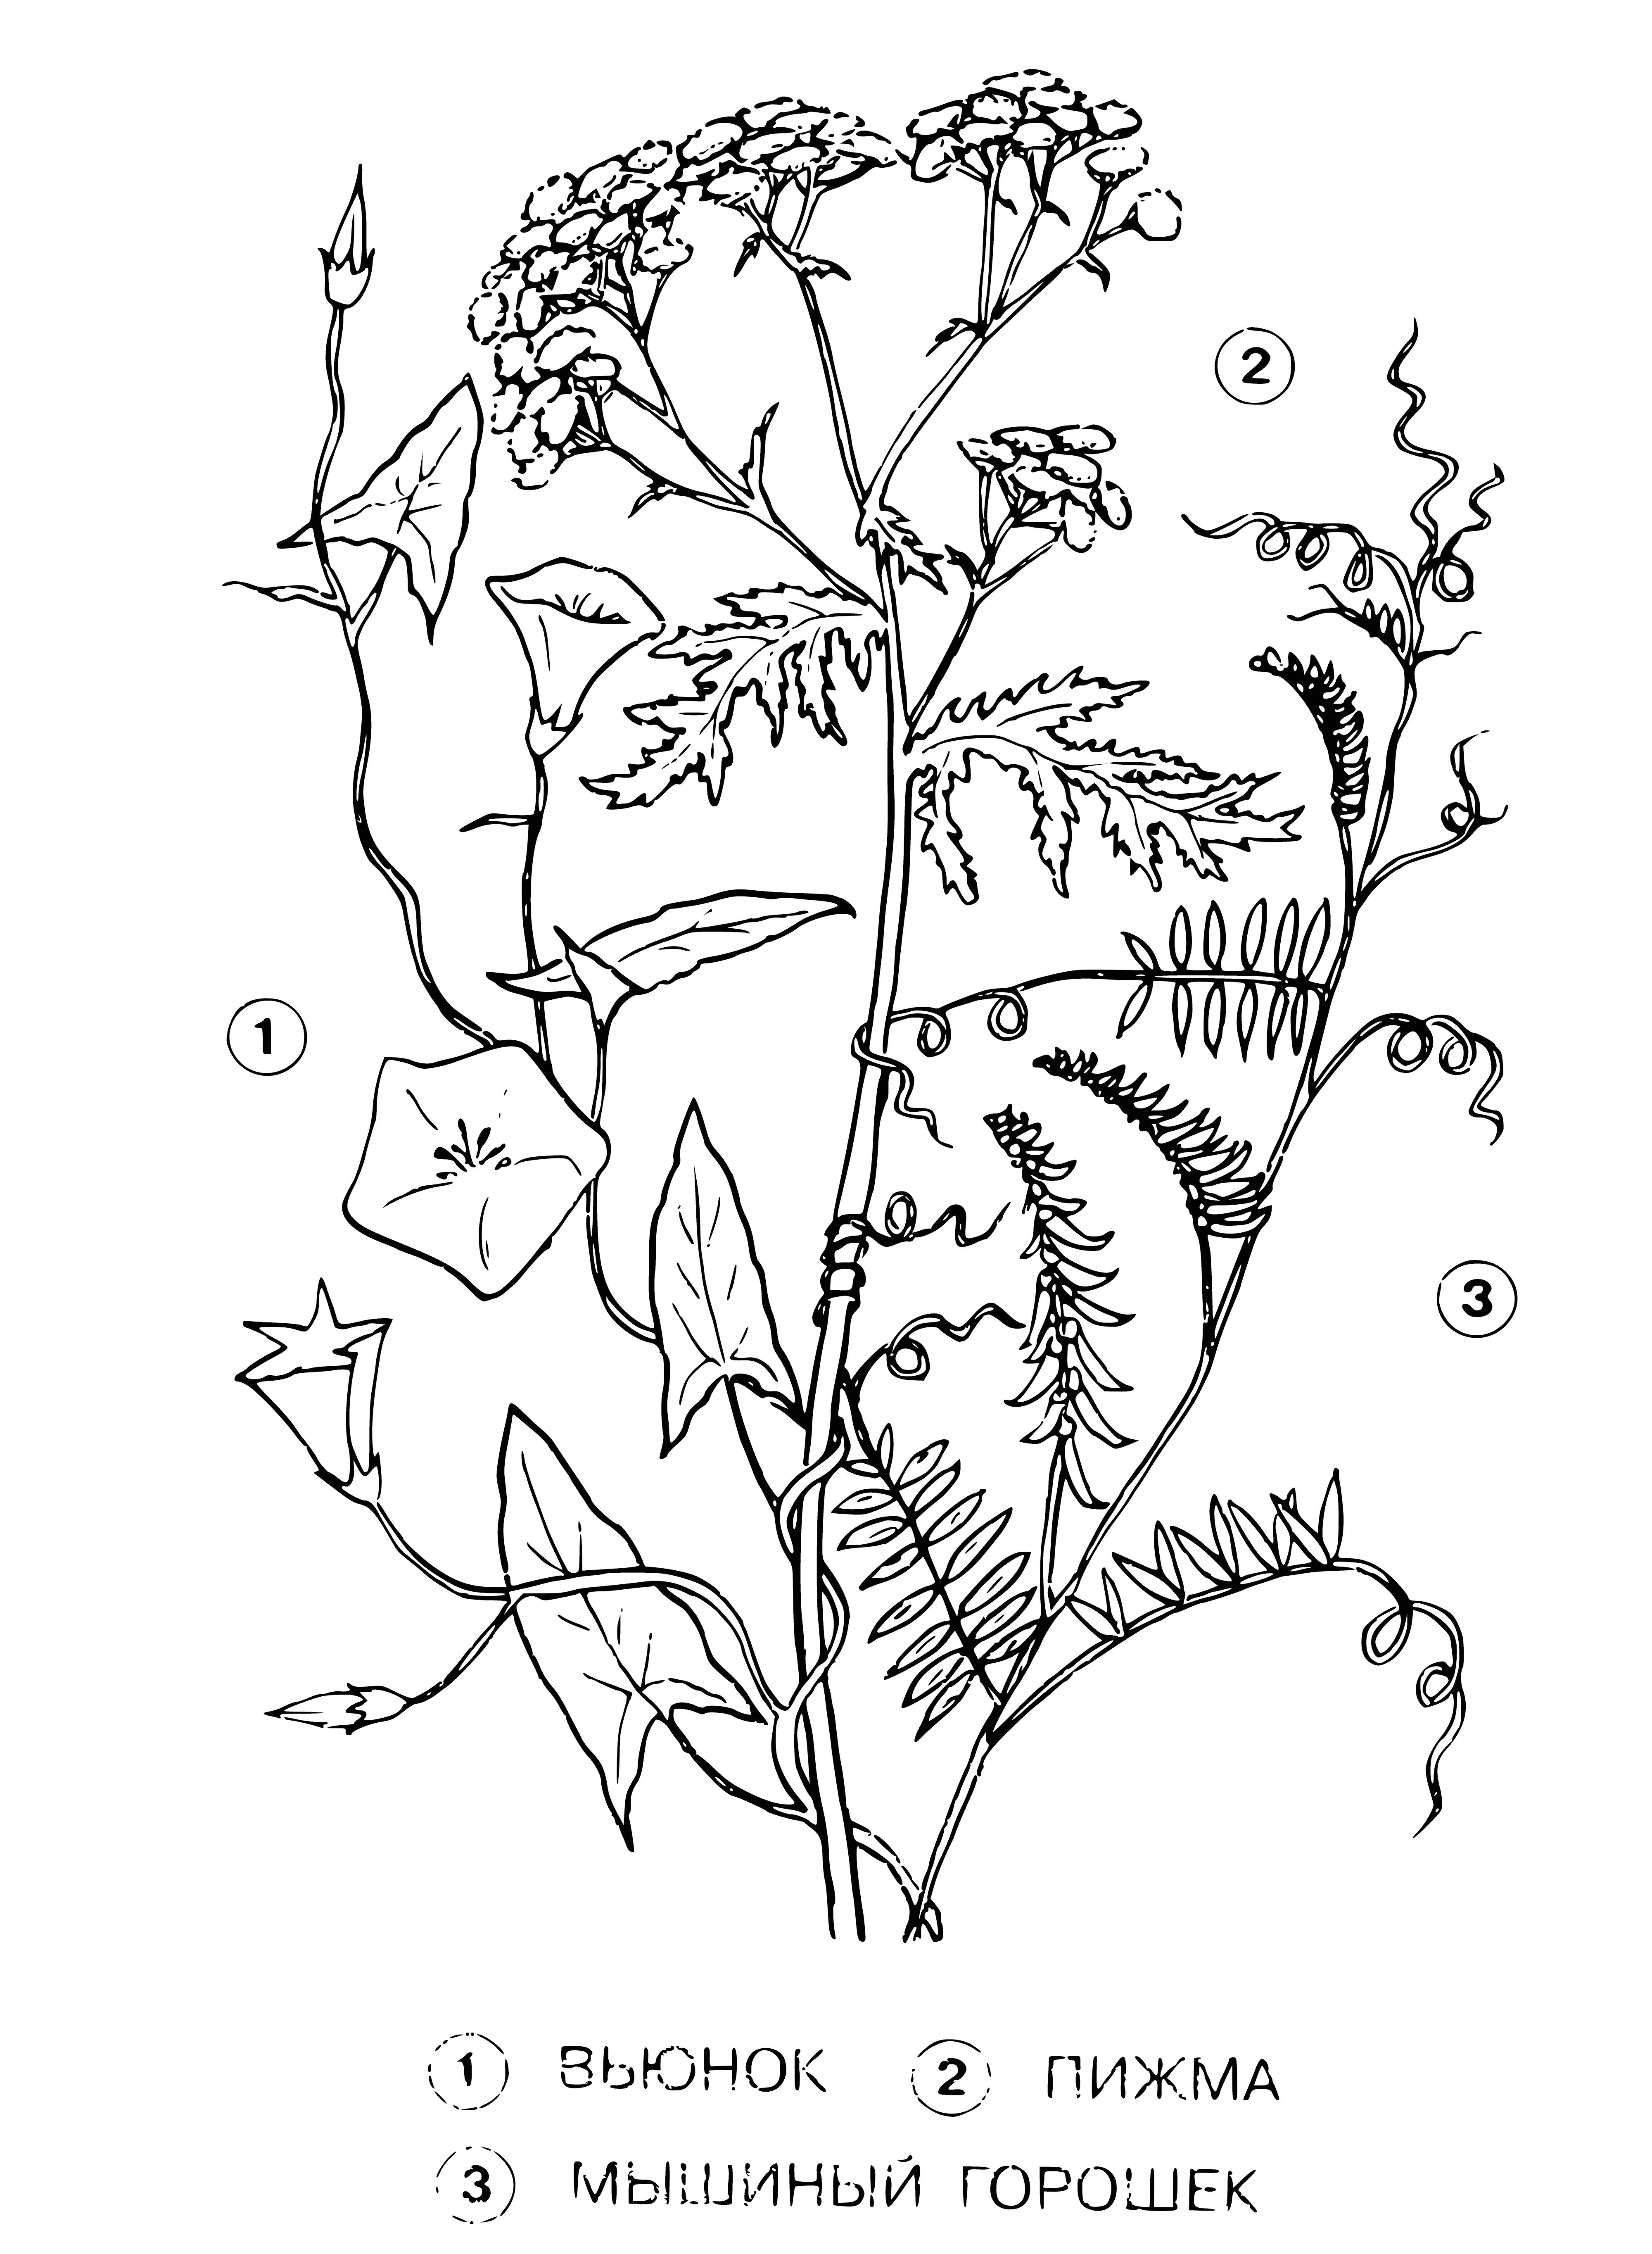 coloring page: Bindweed, tansy, and mouse peas: 3 plants w/ different leaves and flowers.